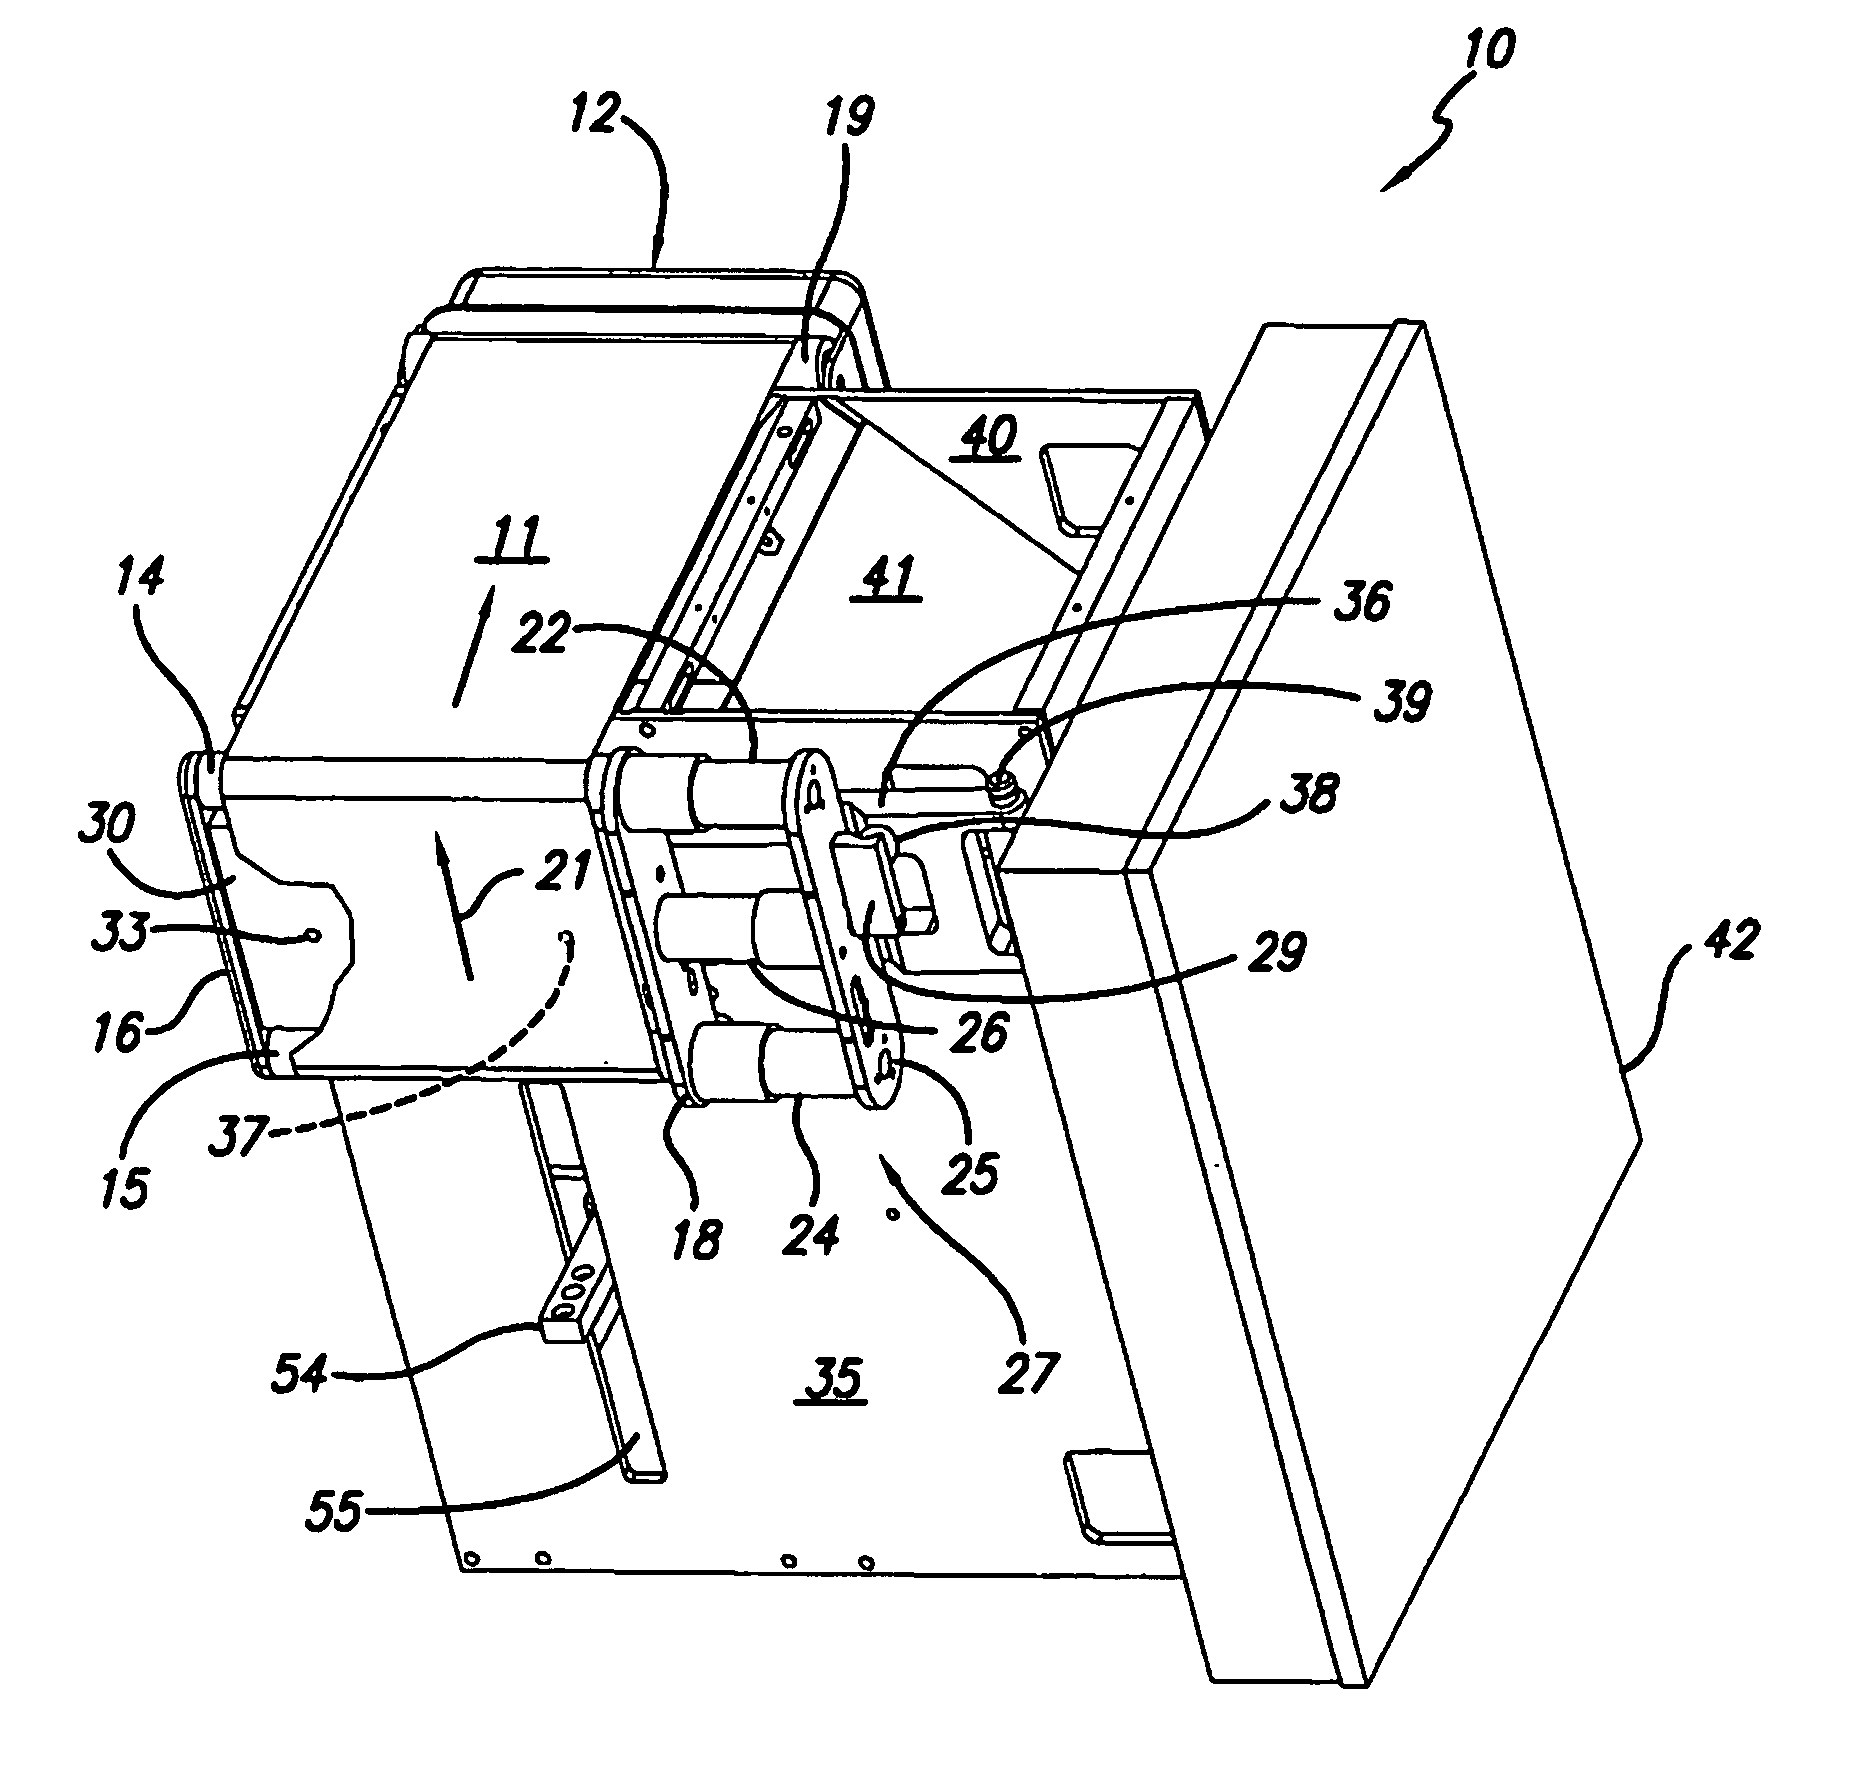 Material delivery tension and tracking system for use in solid imaging